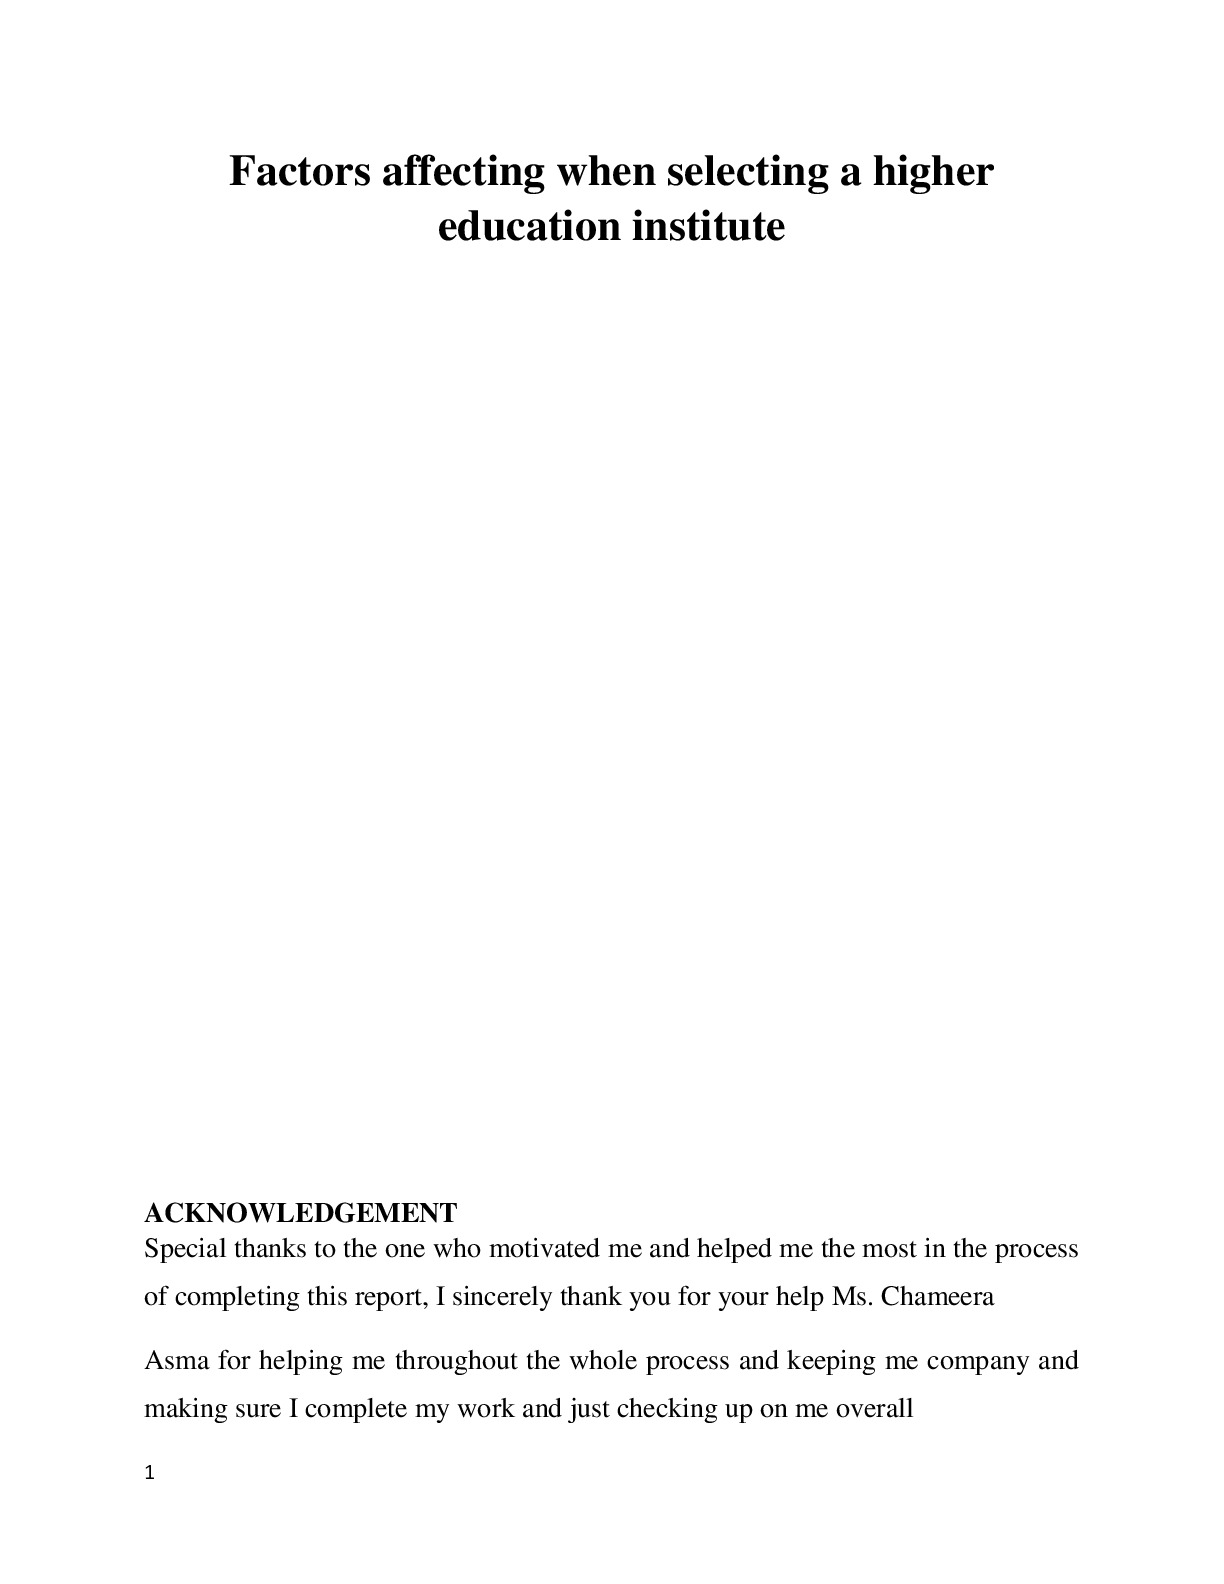 Factors_affecting_when_selecting_a_higher_education.pdf